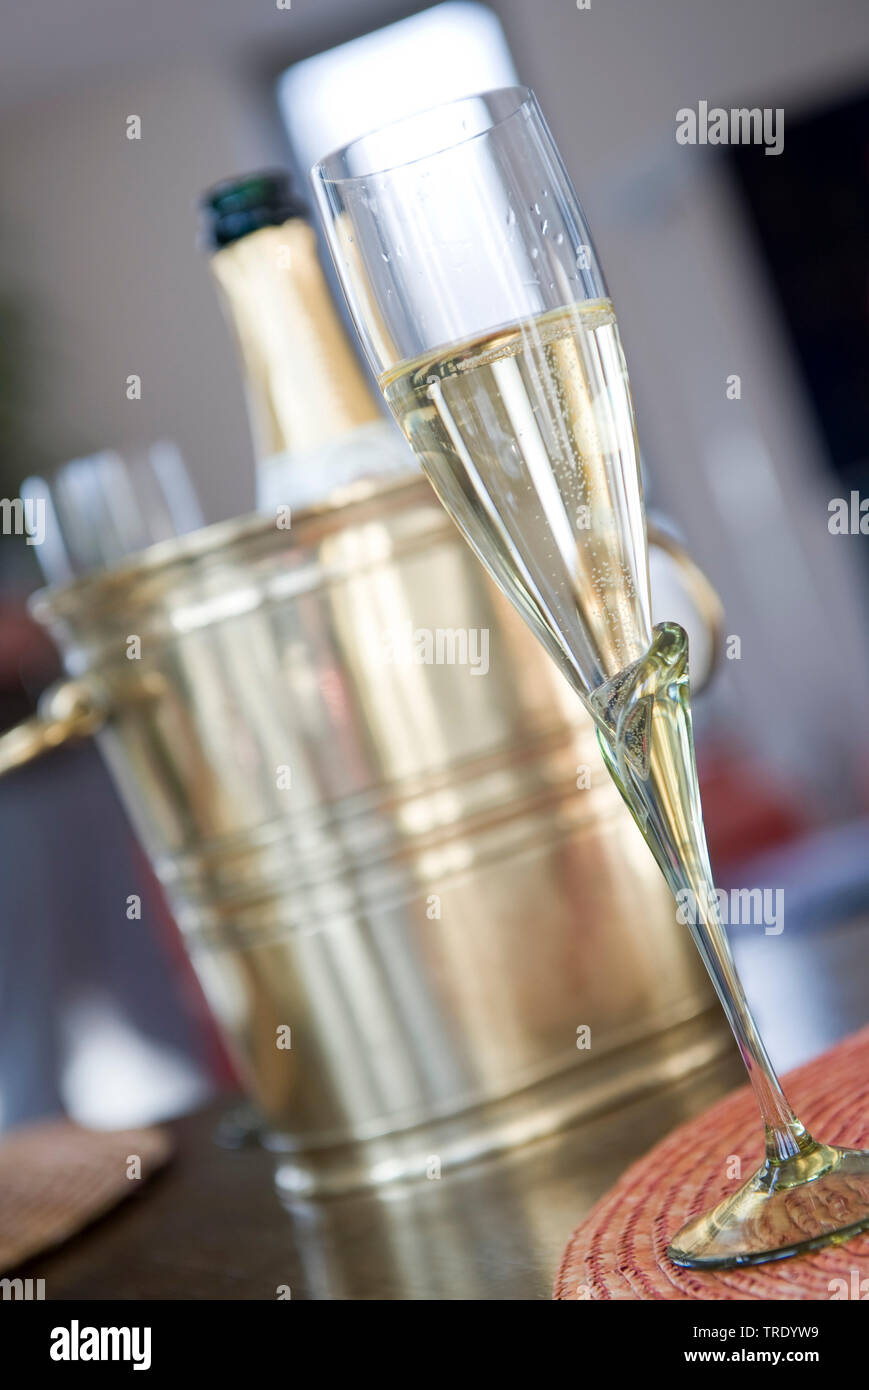 Half-full champagner glass in front of a champagne bottle in a bottle chiller Stock Photo